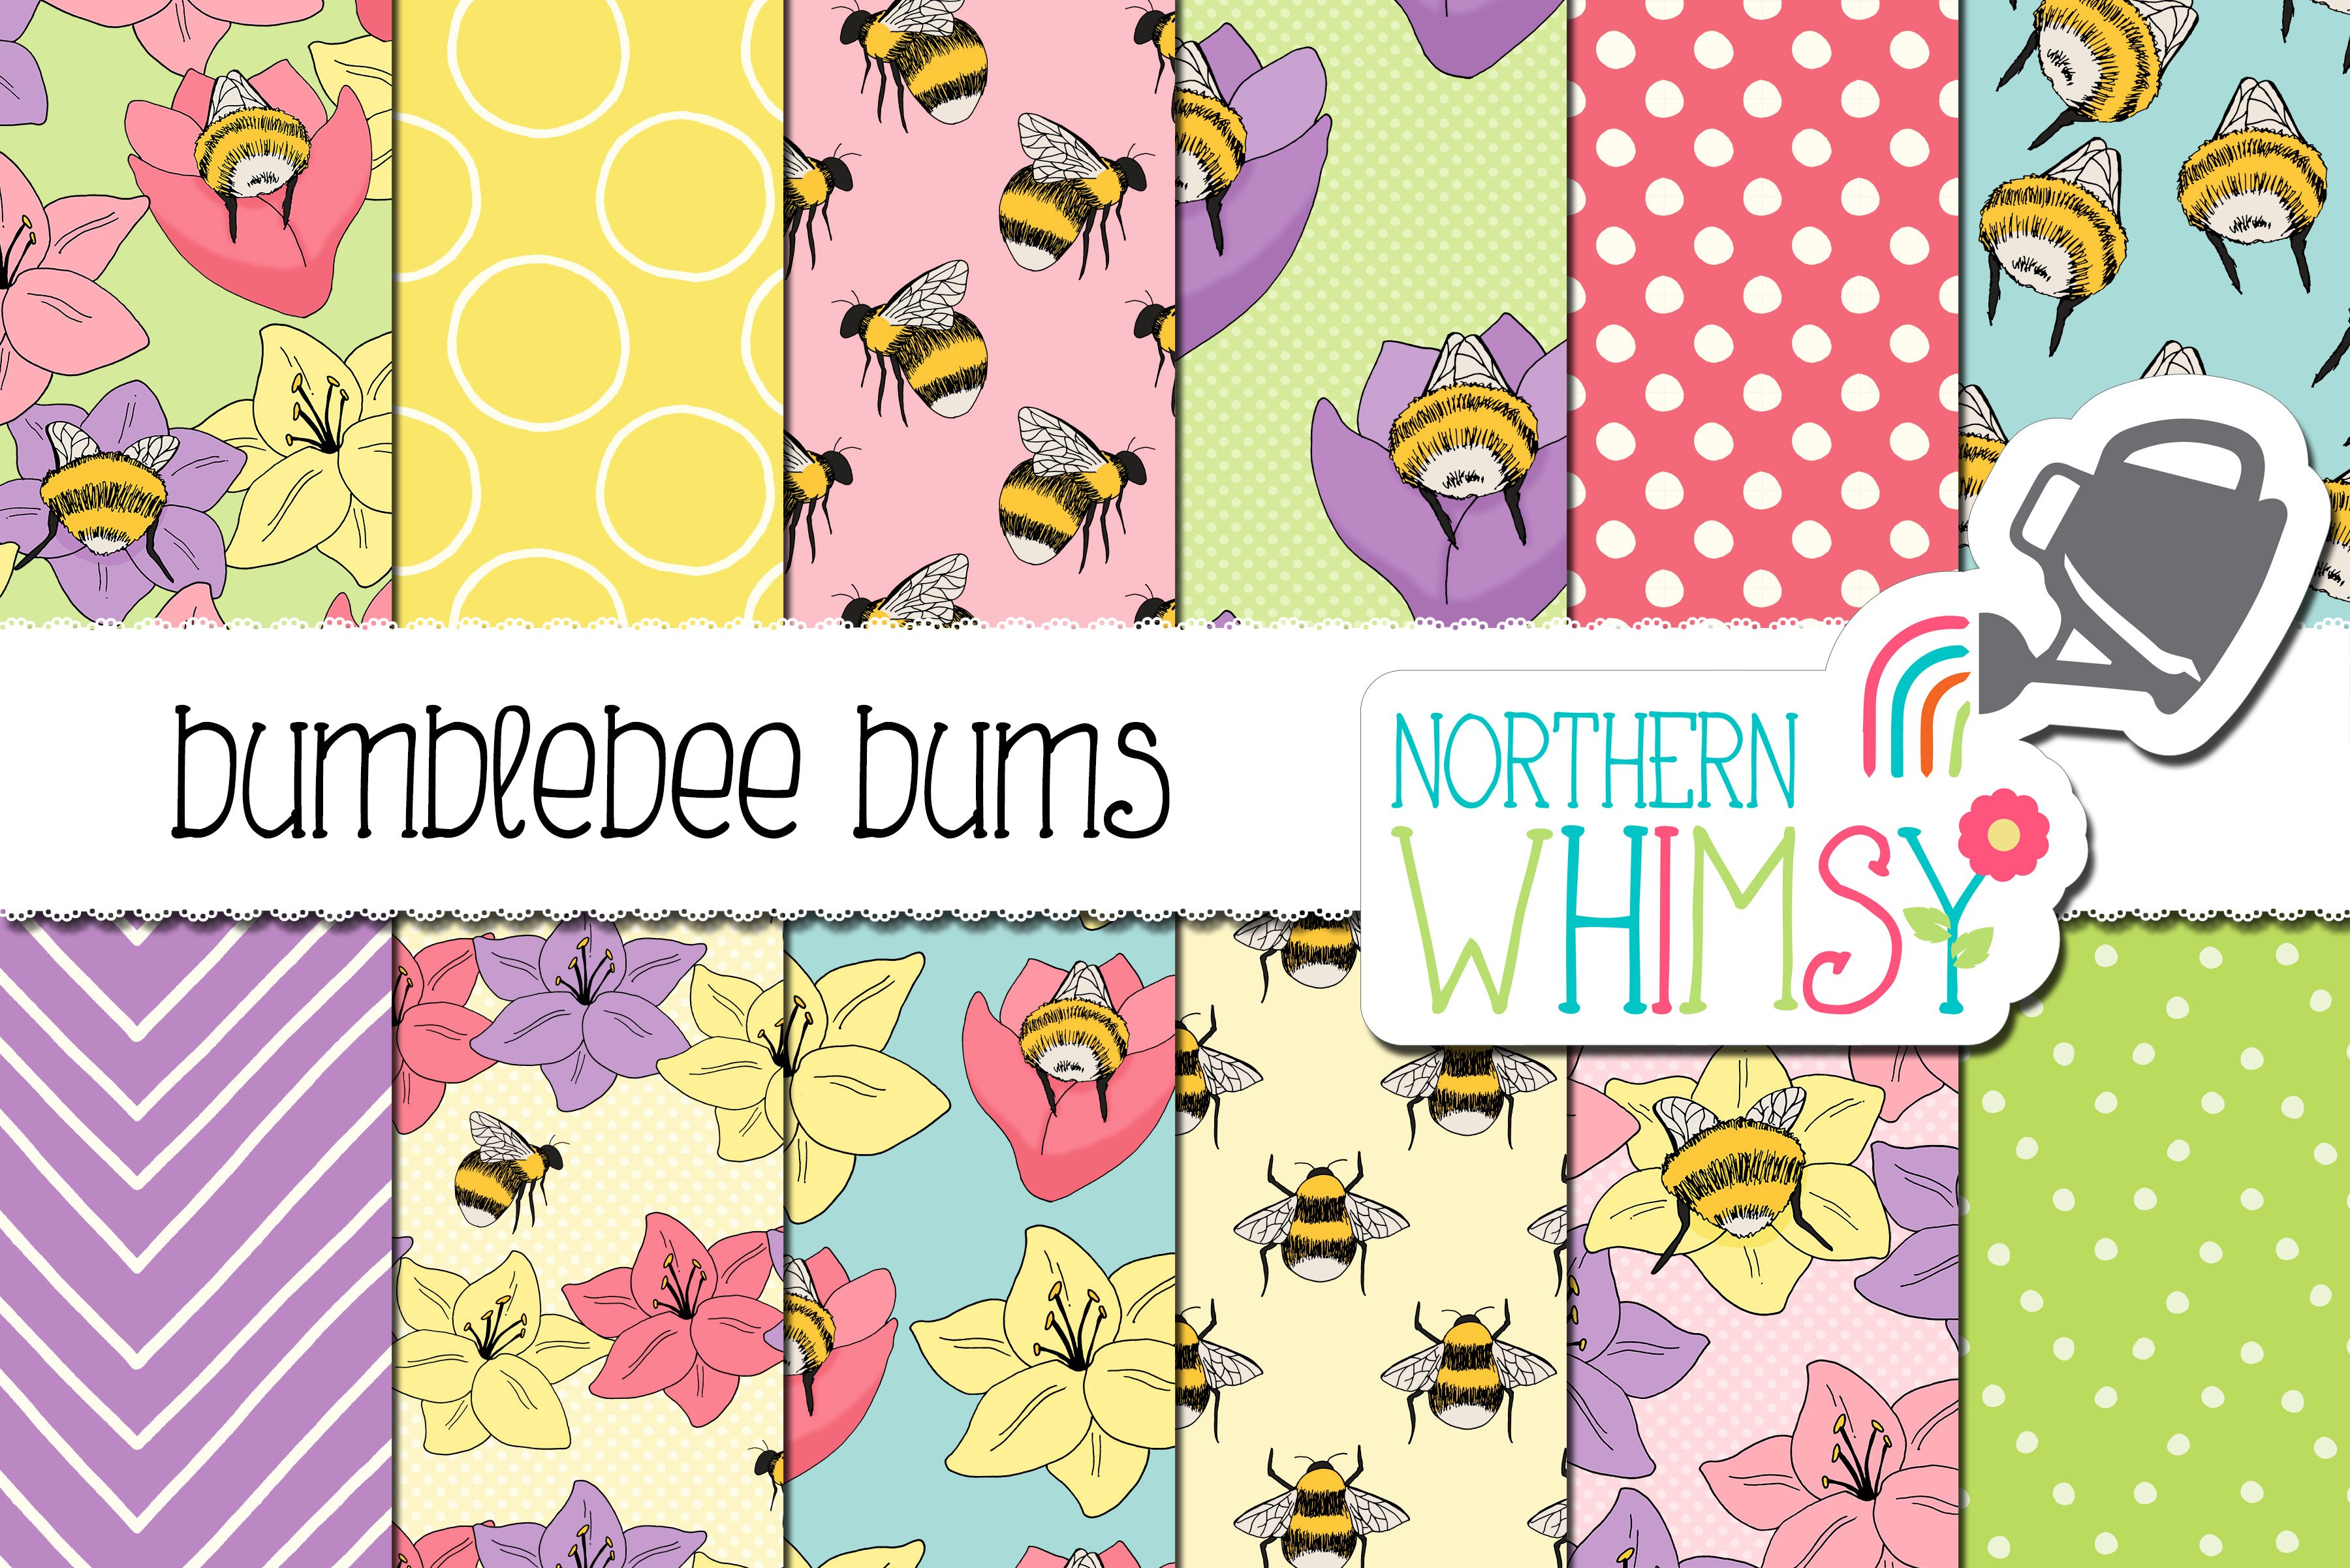 Bee & Flower Seamless Patterns cover image.